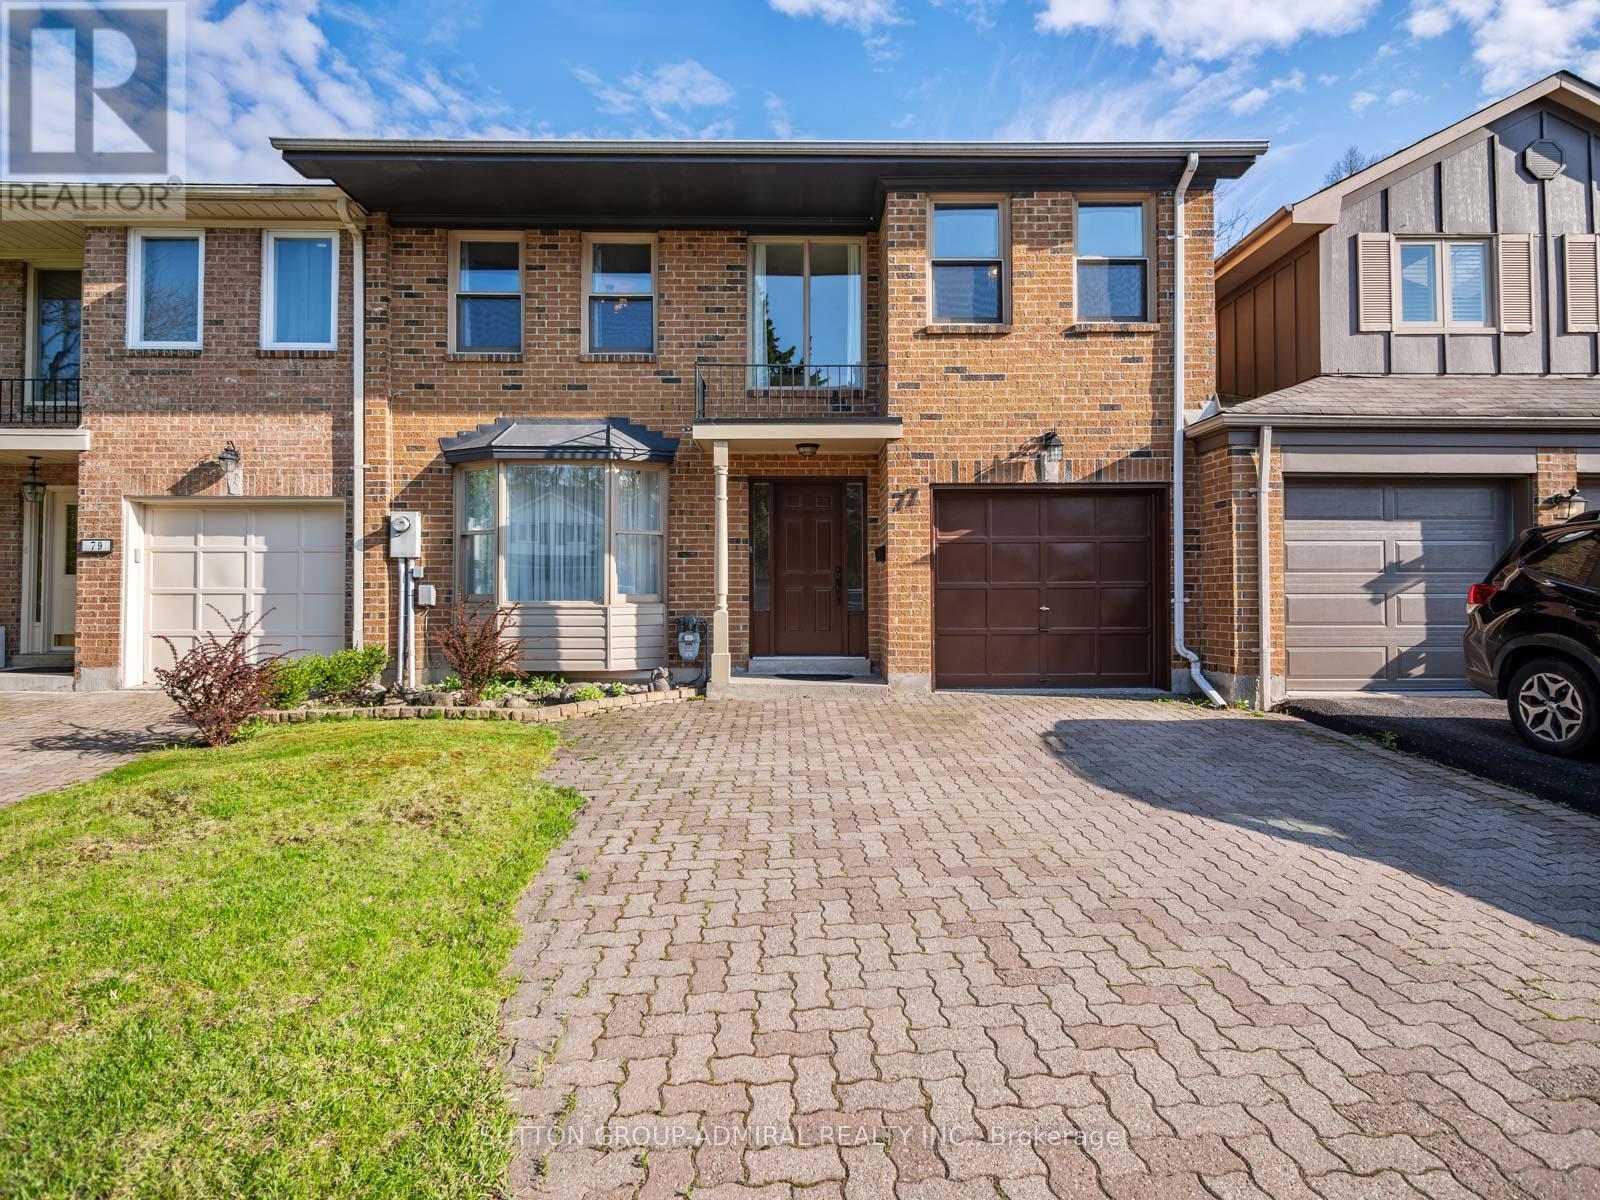 77 CHISWELL CRESCENT, toronto, Ontario